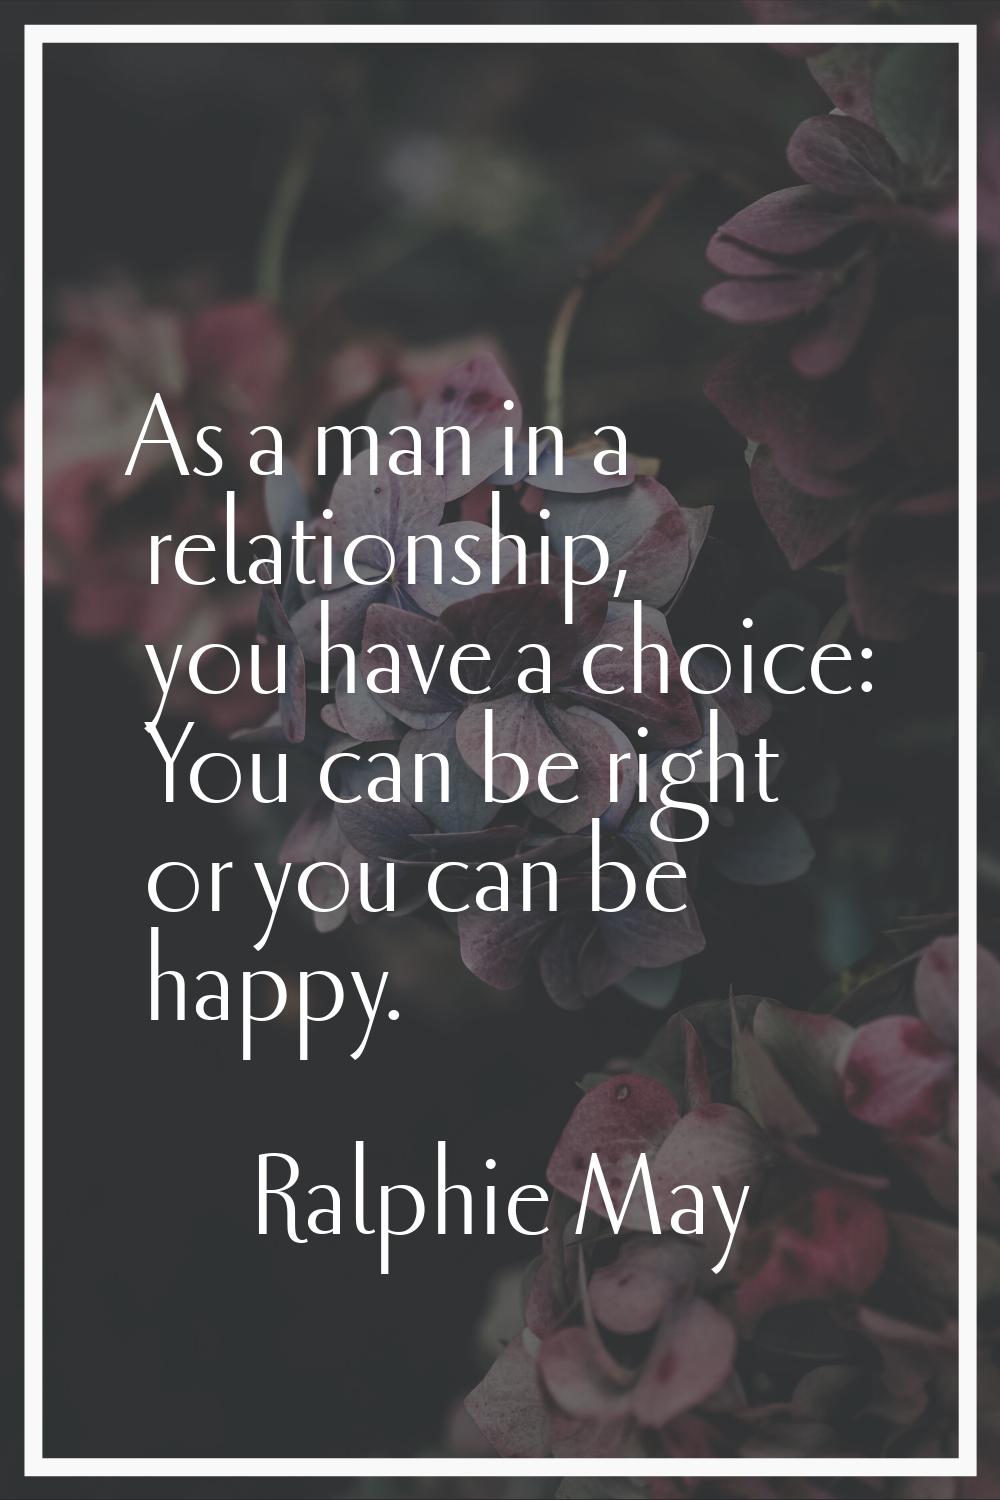 As a man in a relationship, you have a choice: You can be right or you can be happy.